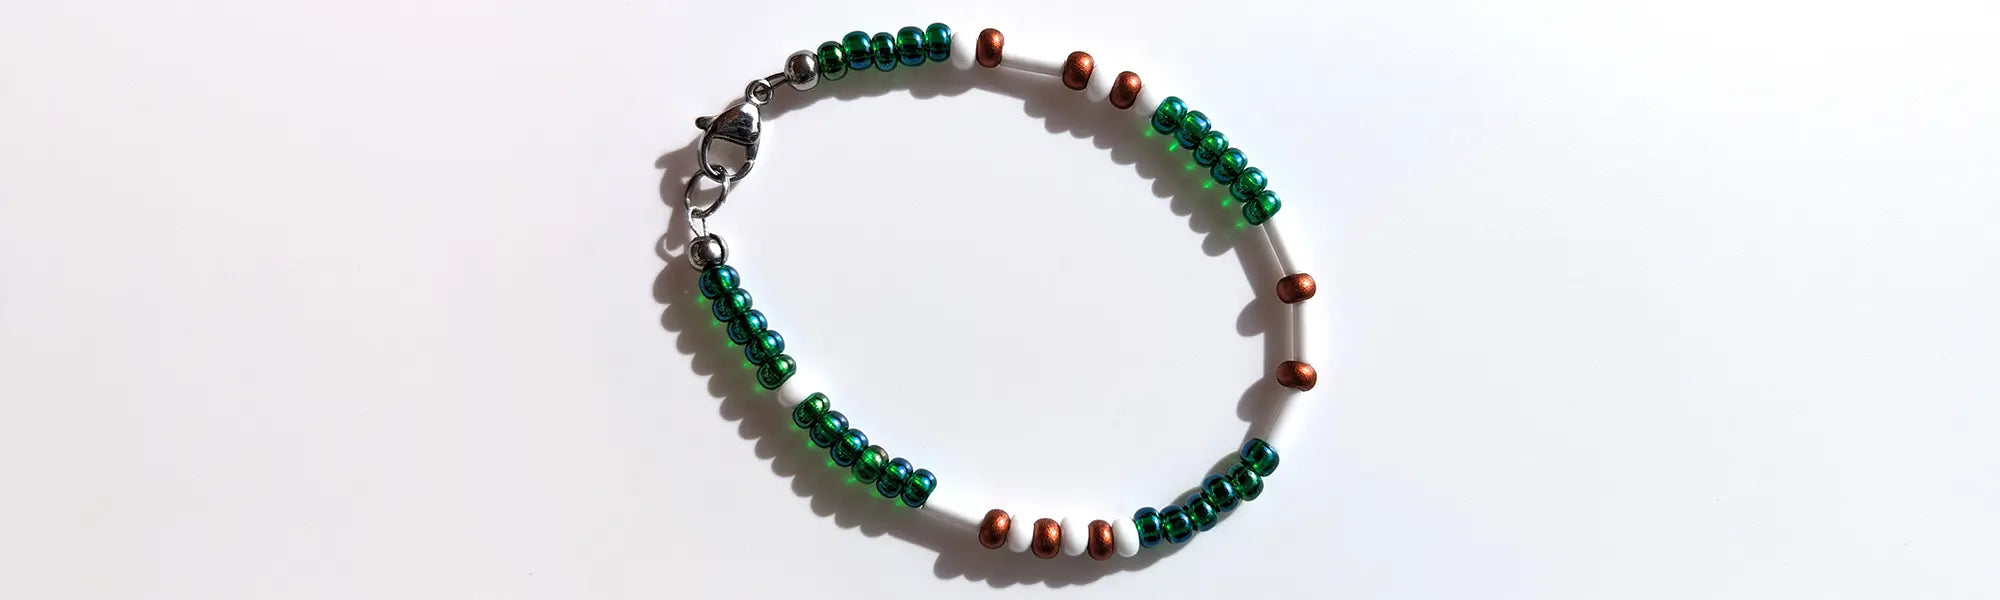 Mesmerizing Mermaid Luster Morse code bracelet, handcrafted with serene blue-green & copper Czech glass beads, holds the secret message “Love.”